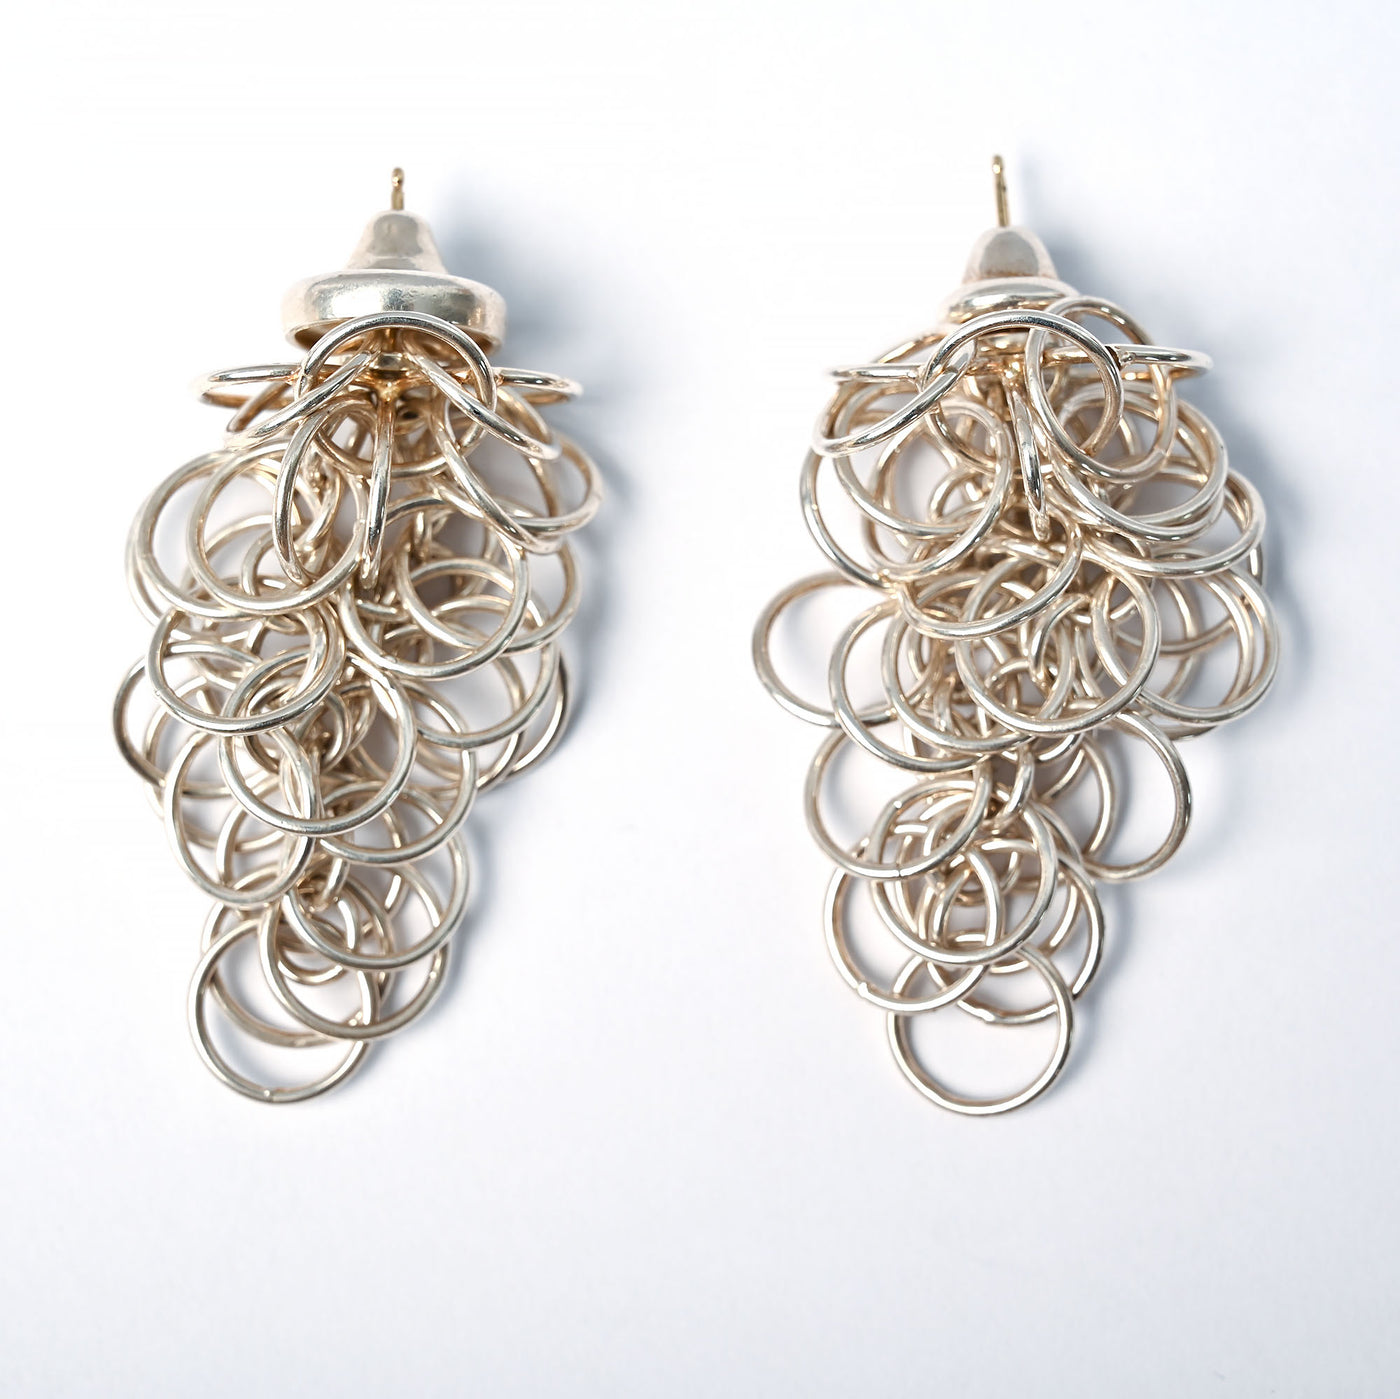 Tane sterling silver earrings made up of many interwoven circles.